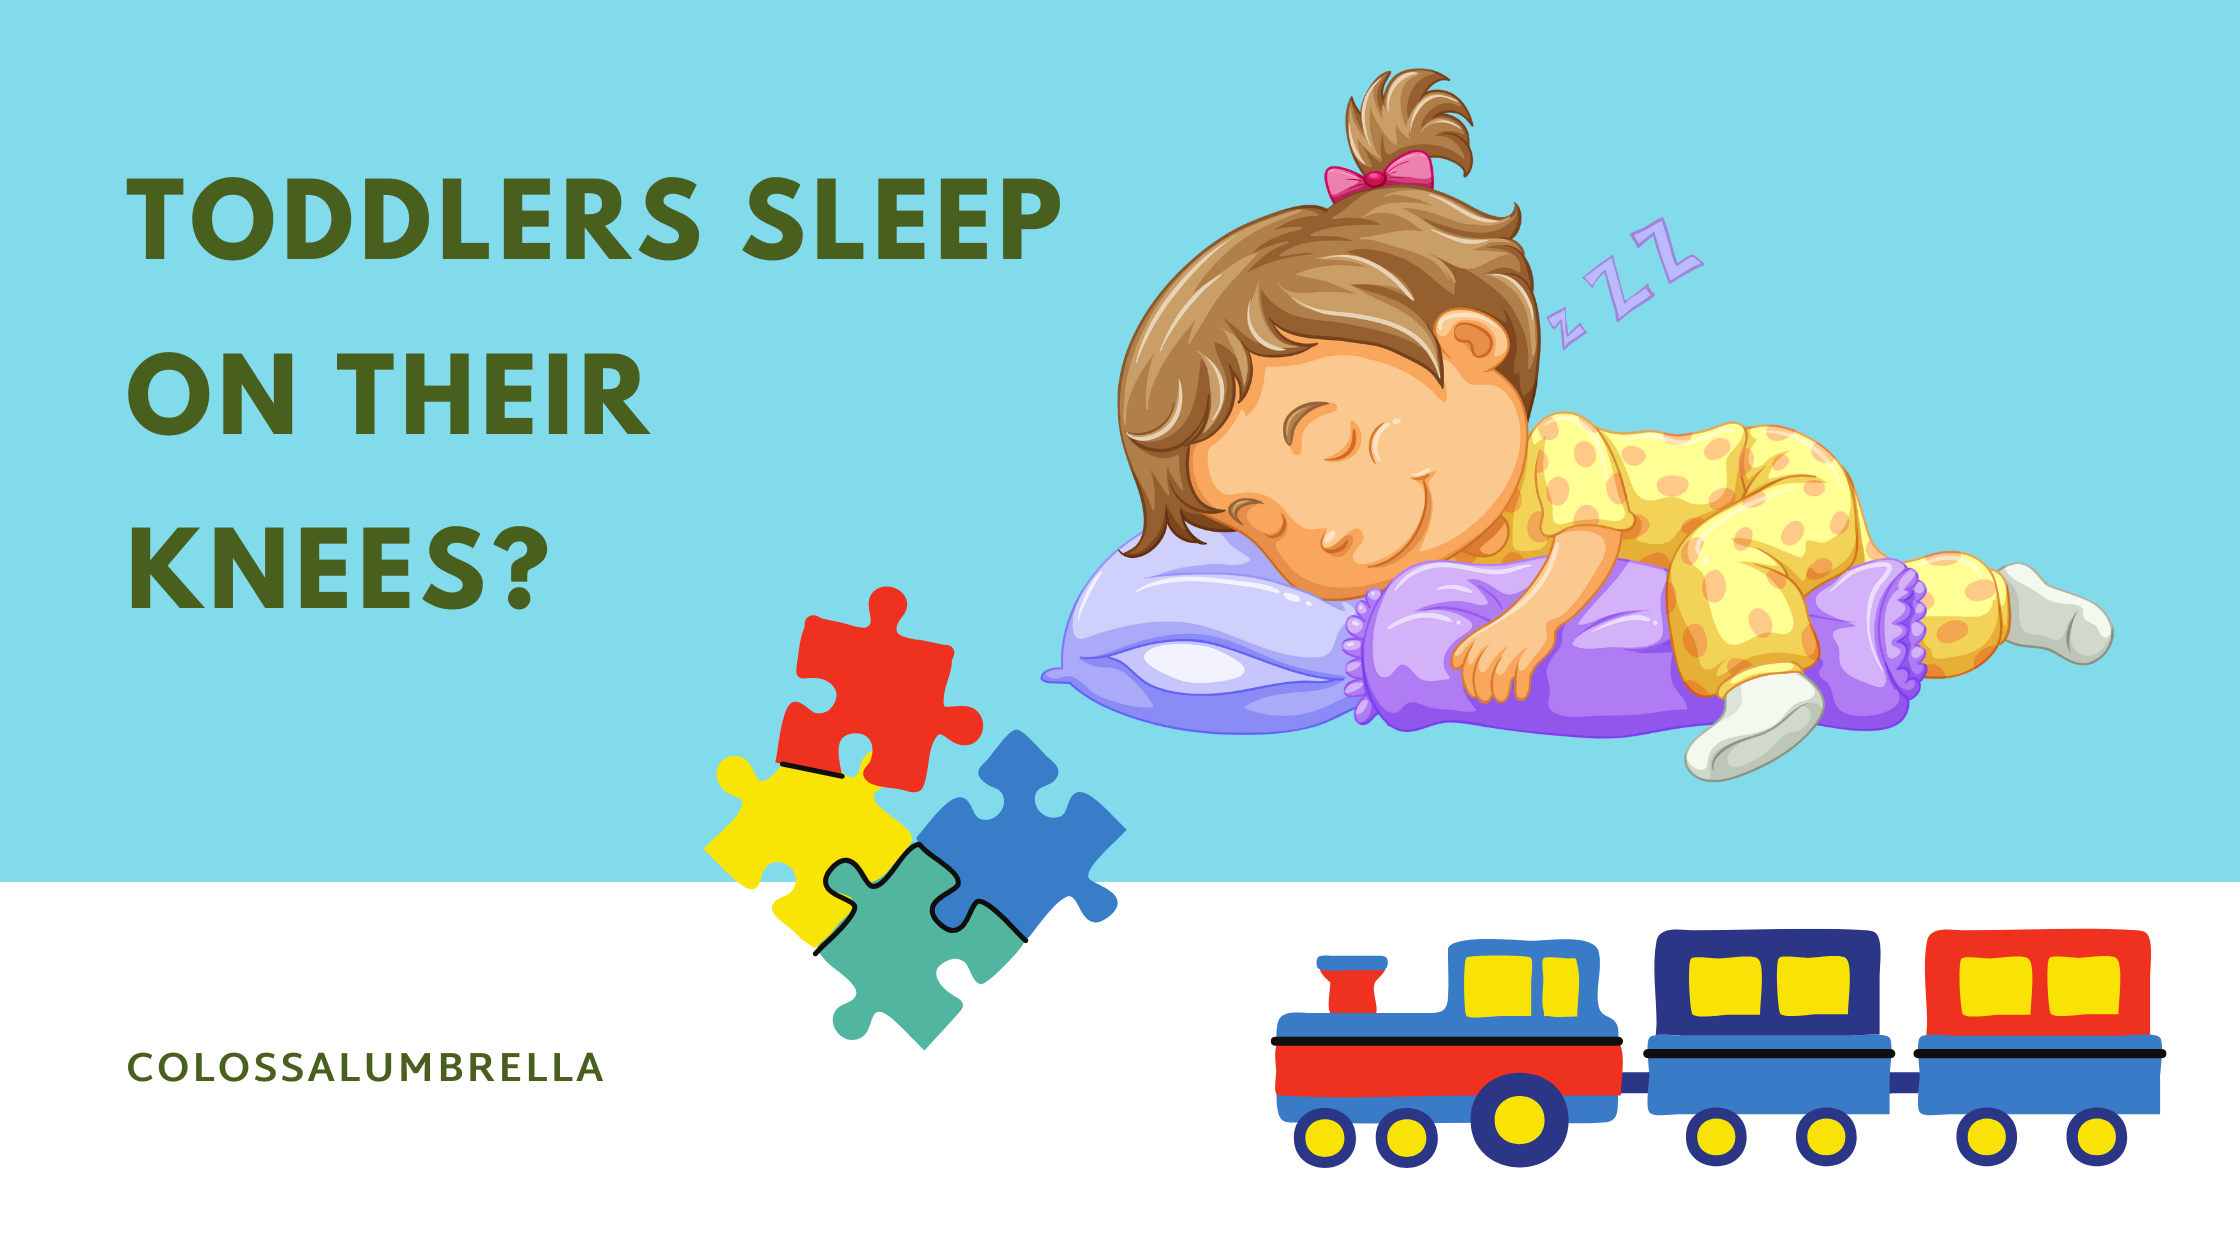 Why do toddlers sleep on their knees? It is safe?